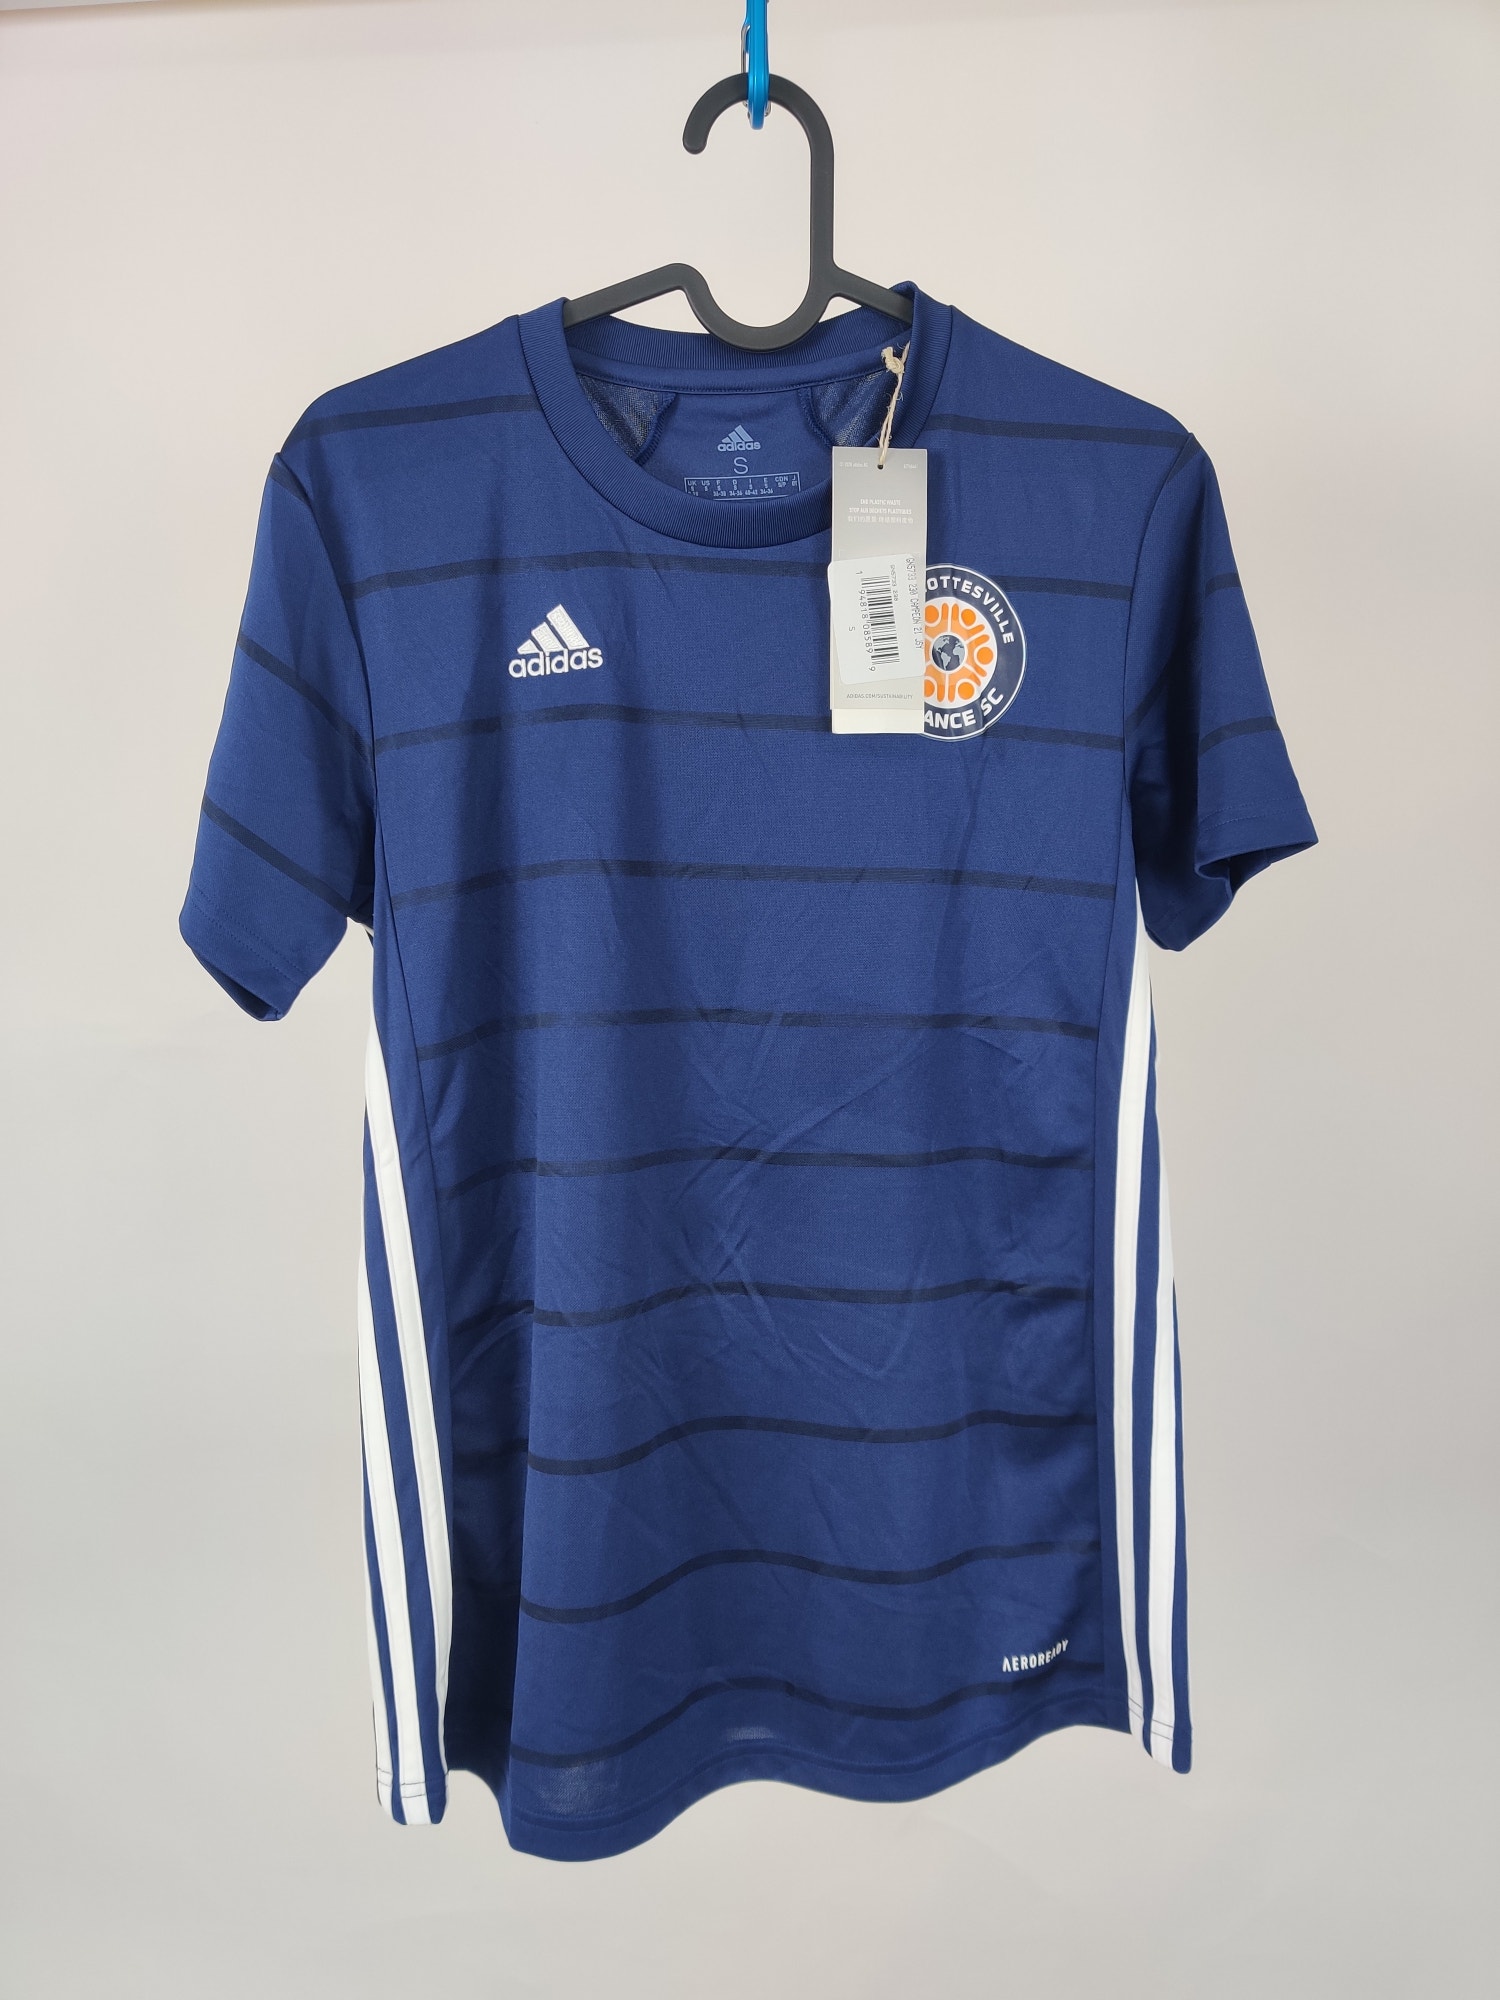 (V) NEW Adidas  Women Charlottesville Alliance SC #17 shirt soccer jersey sz S - Picture 1 of 10